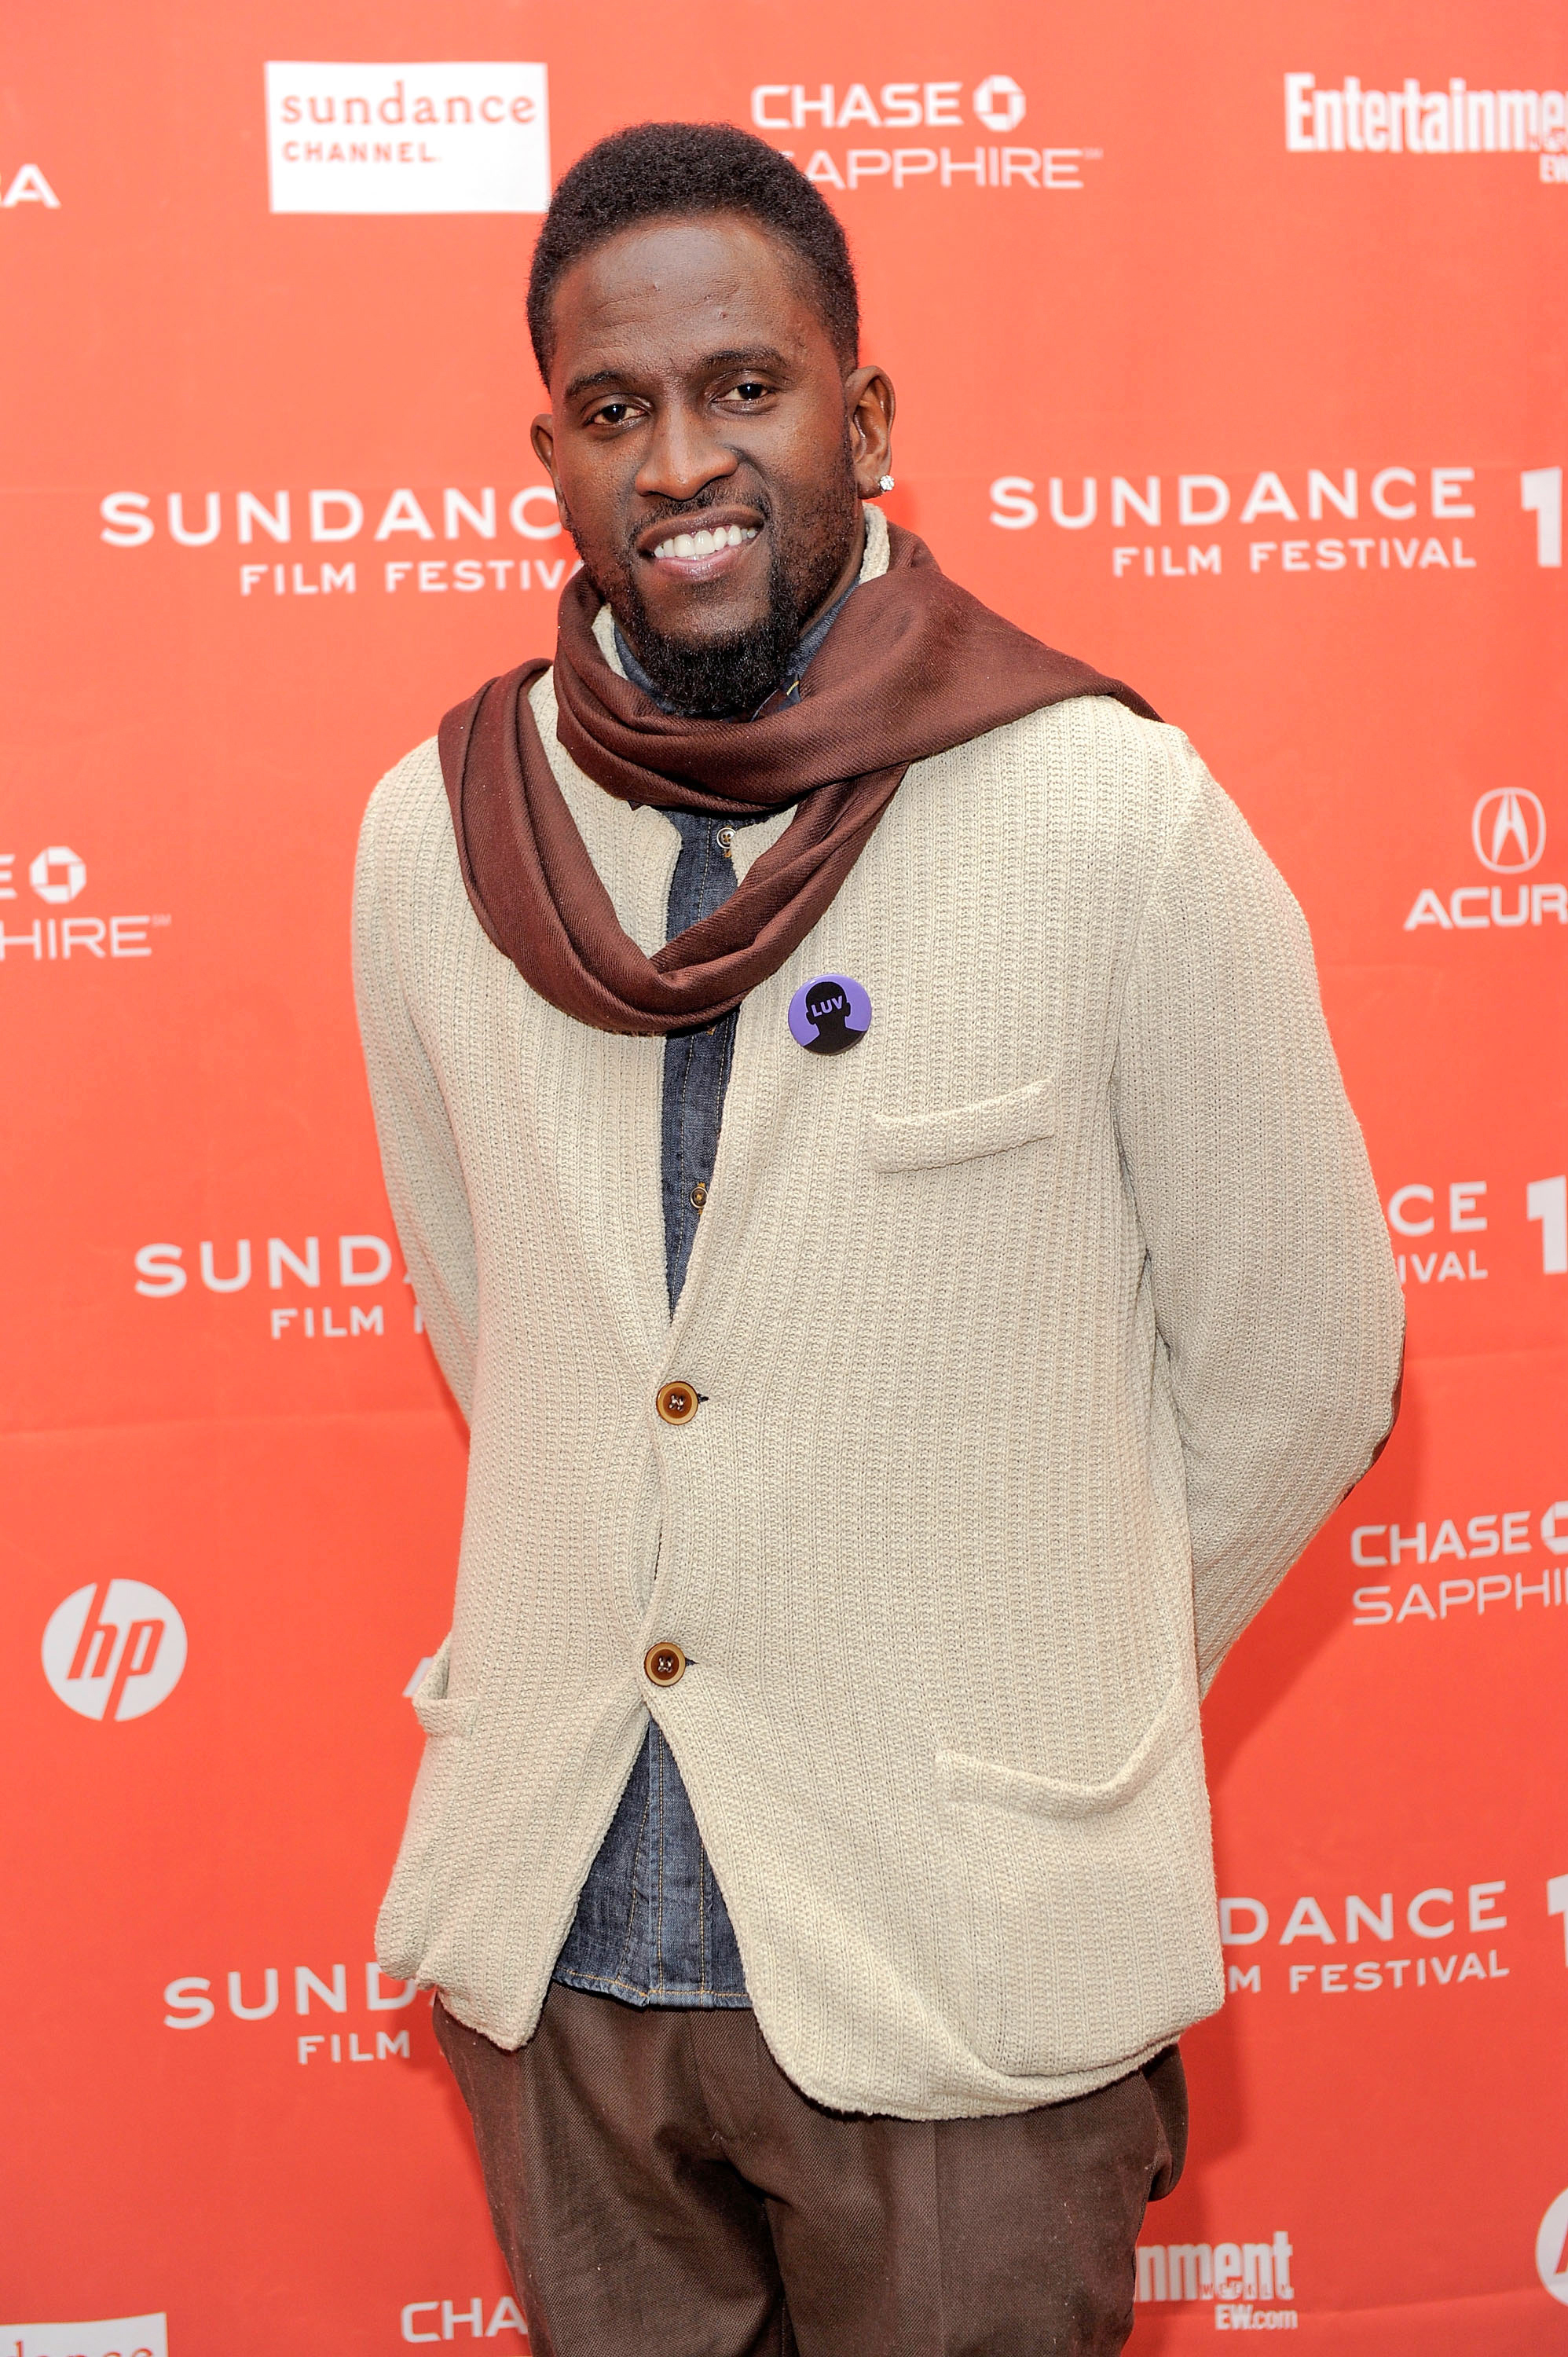 Anwan Glover attends the "LUV" premiere during the 2012 Sundance Film Festival held at Eccles Center Theatre on Jan. 23, 2012 in Park City, Utah.